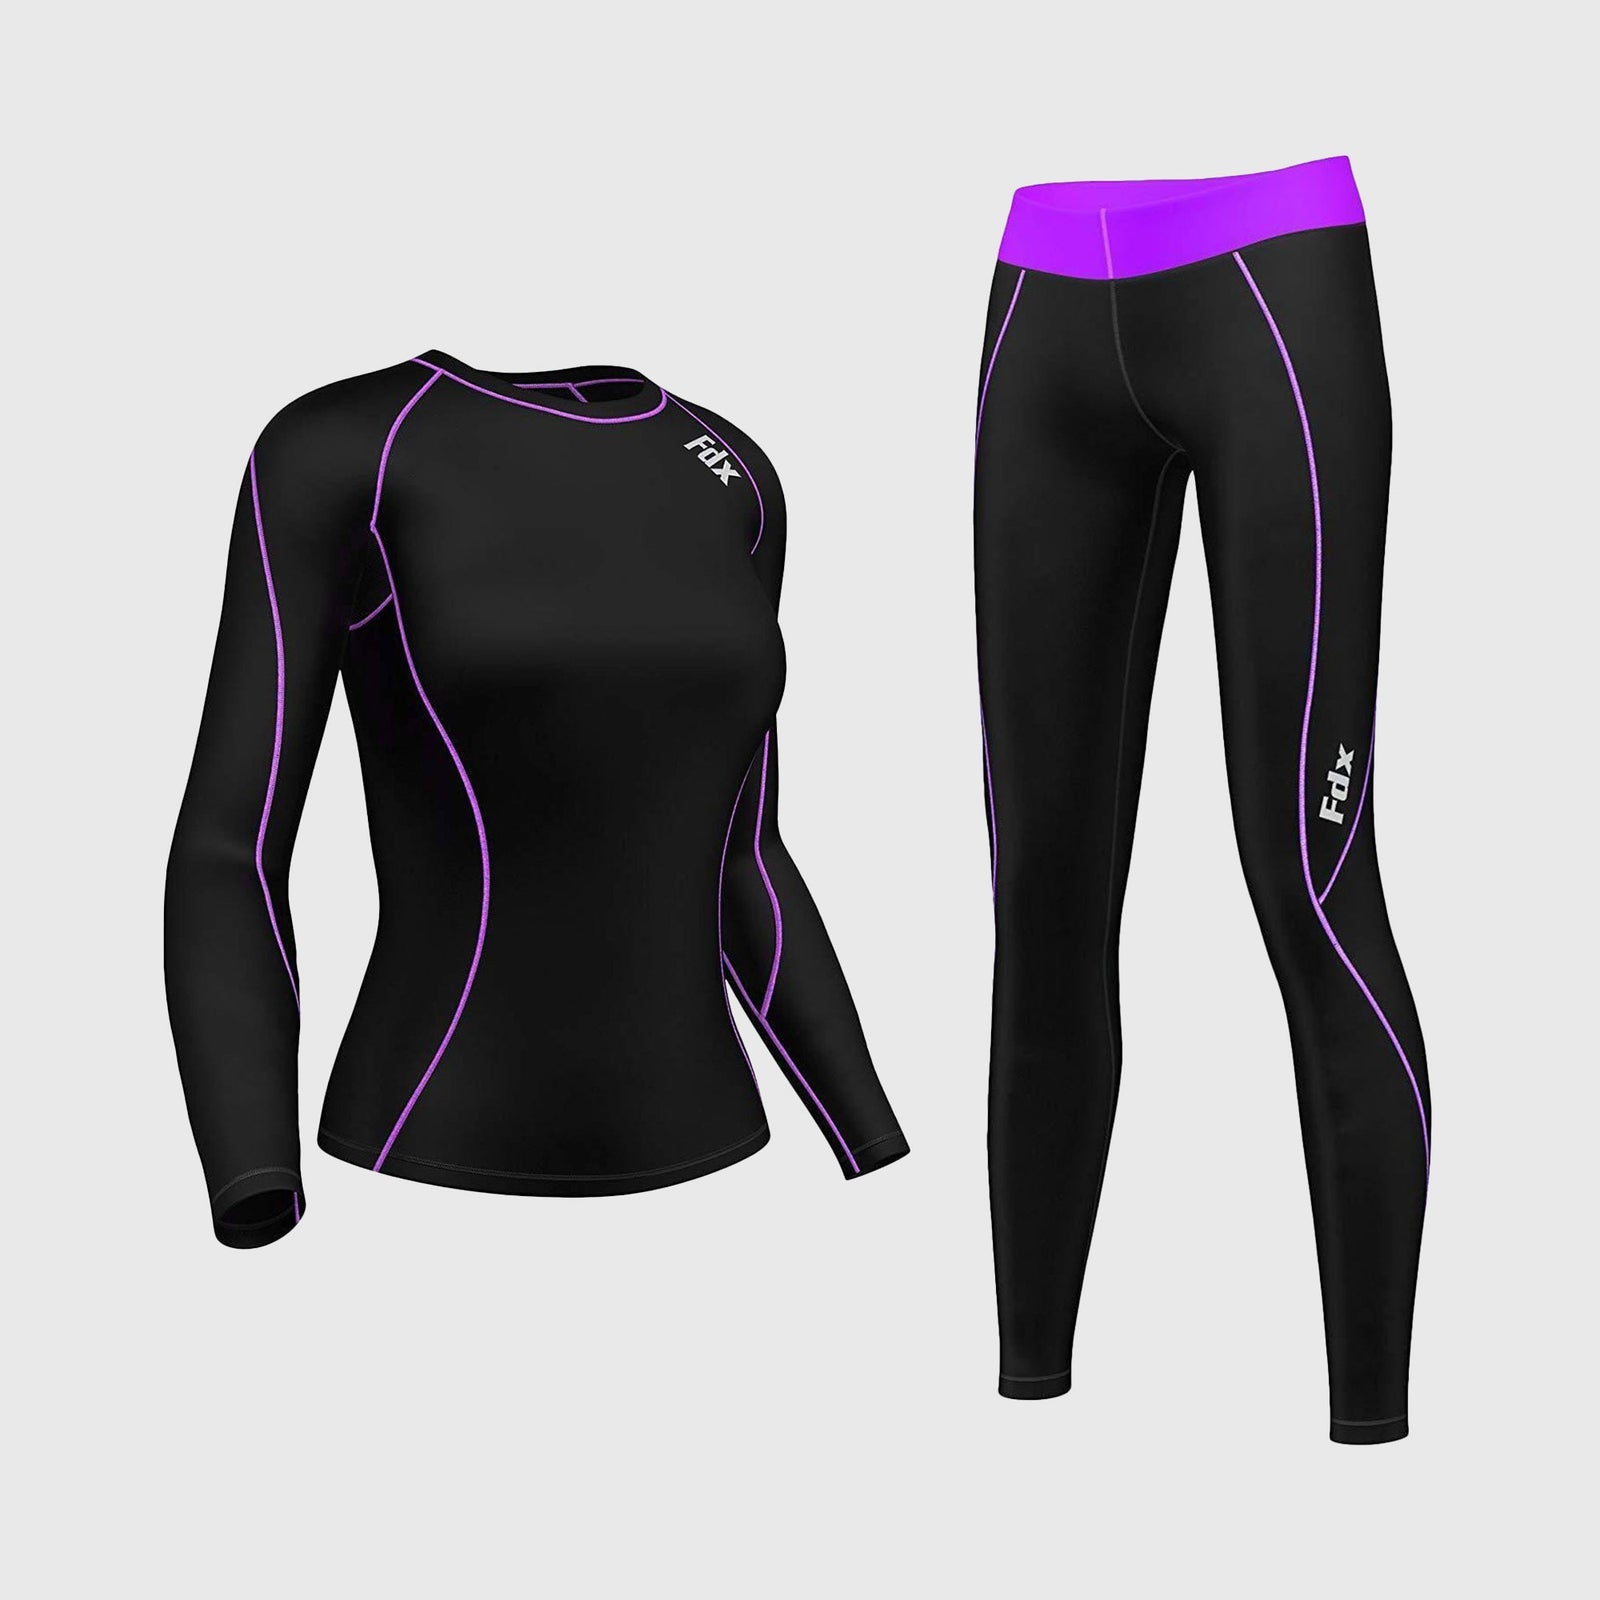 Fdx Women's Black & Purple Long Sleeve Compression Top & Compression Tights Base Layer Gym Training Jogging Yoga Fitness Body Wear - Monarch